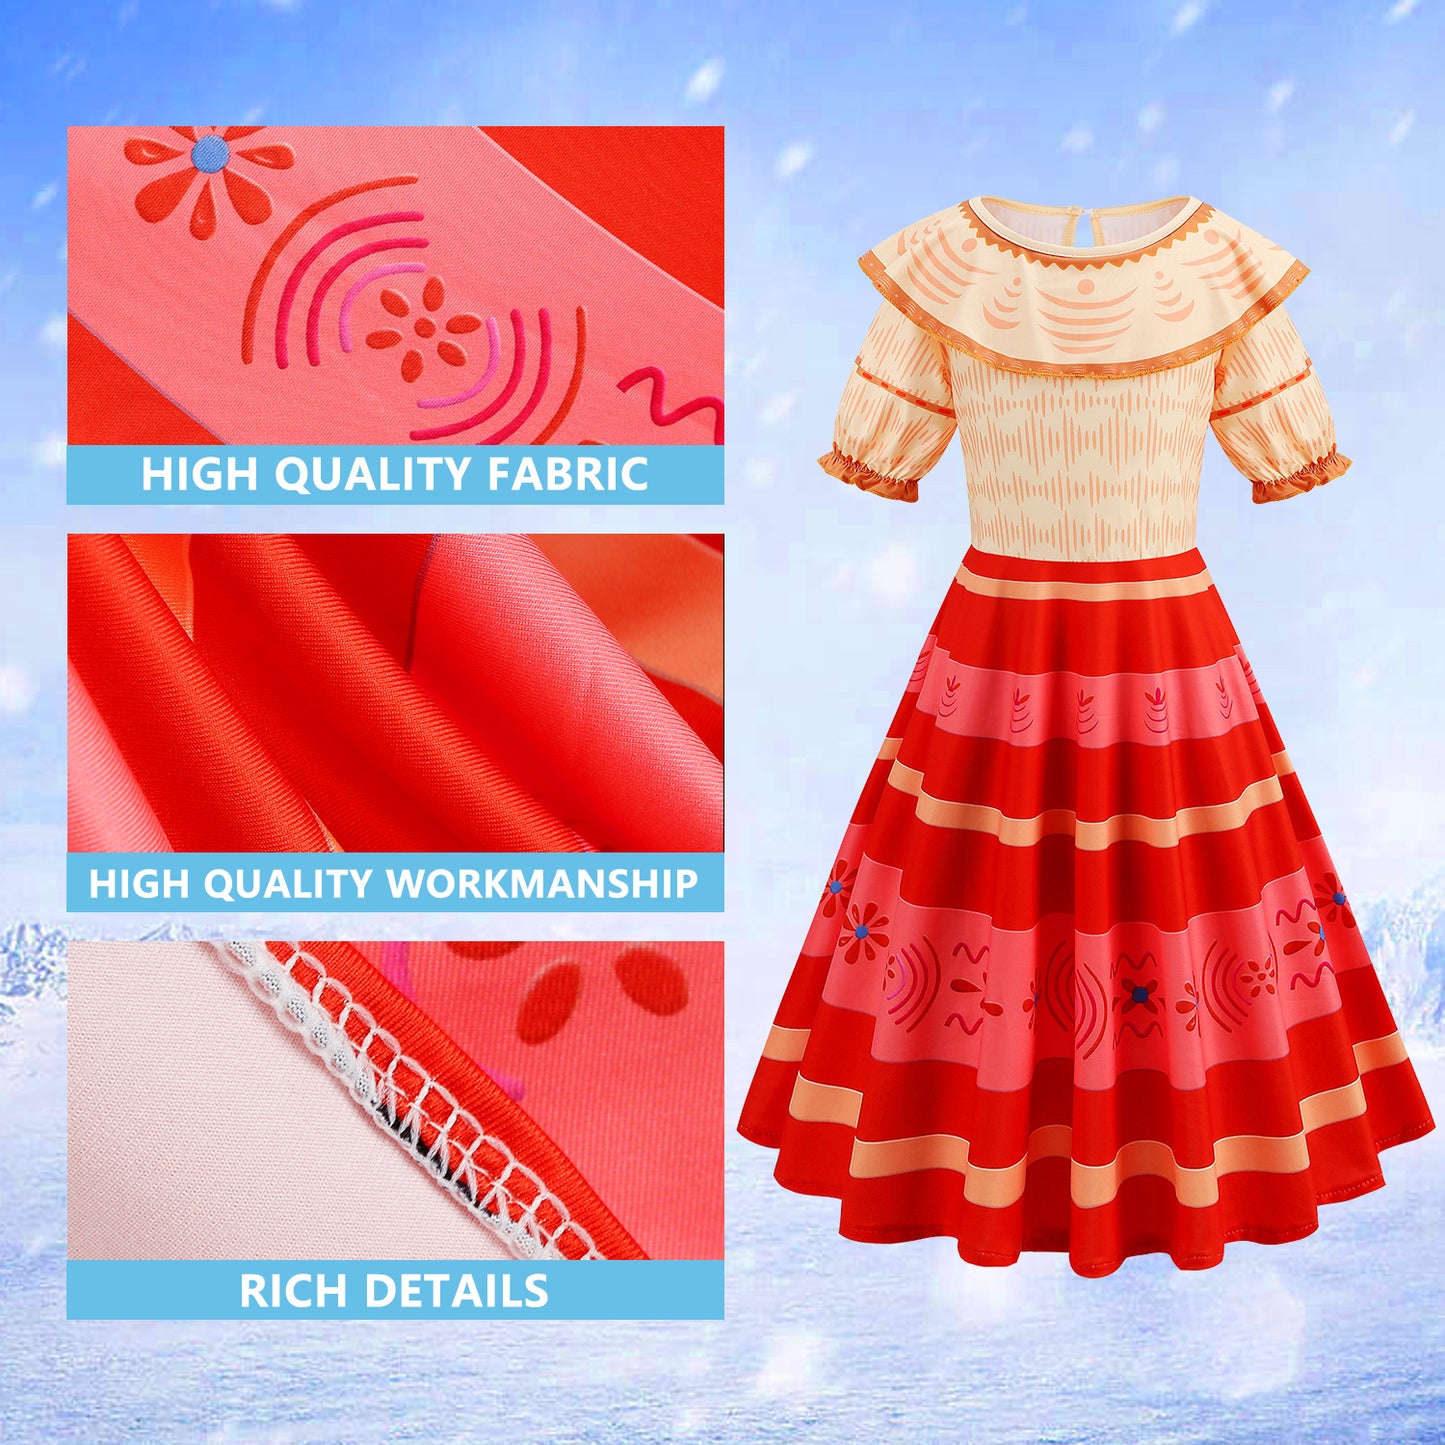 Foierp Girls Beautiful Dress - Fancy Costume Dress with Necklace Red Bow